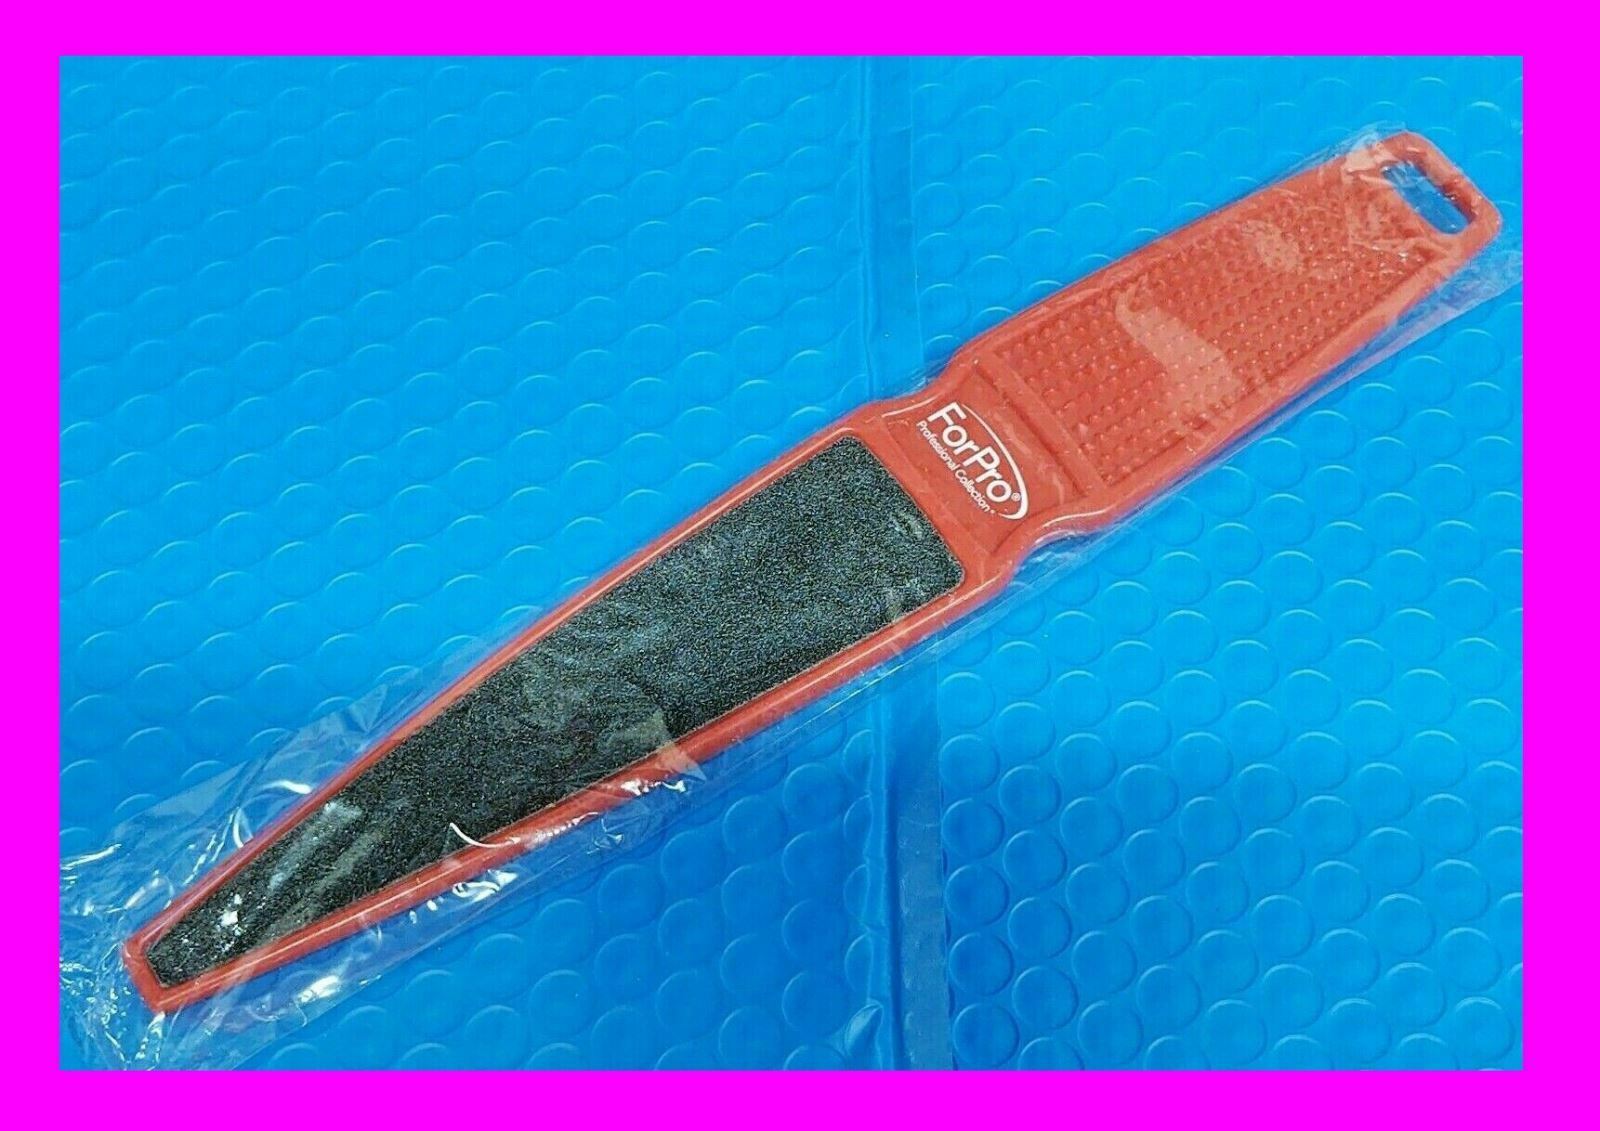 PADDLE FOOT FILE Pedicure Callus & Dead Skin Remover Heel 80/180 Grit 2 Sided!!!